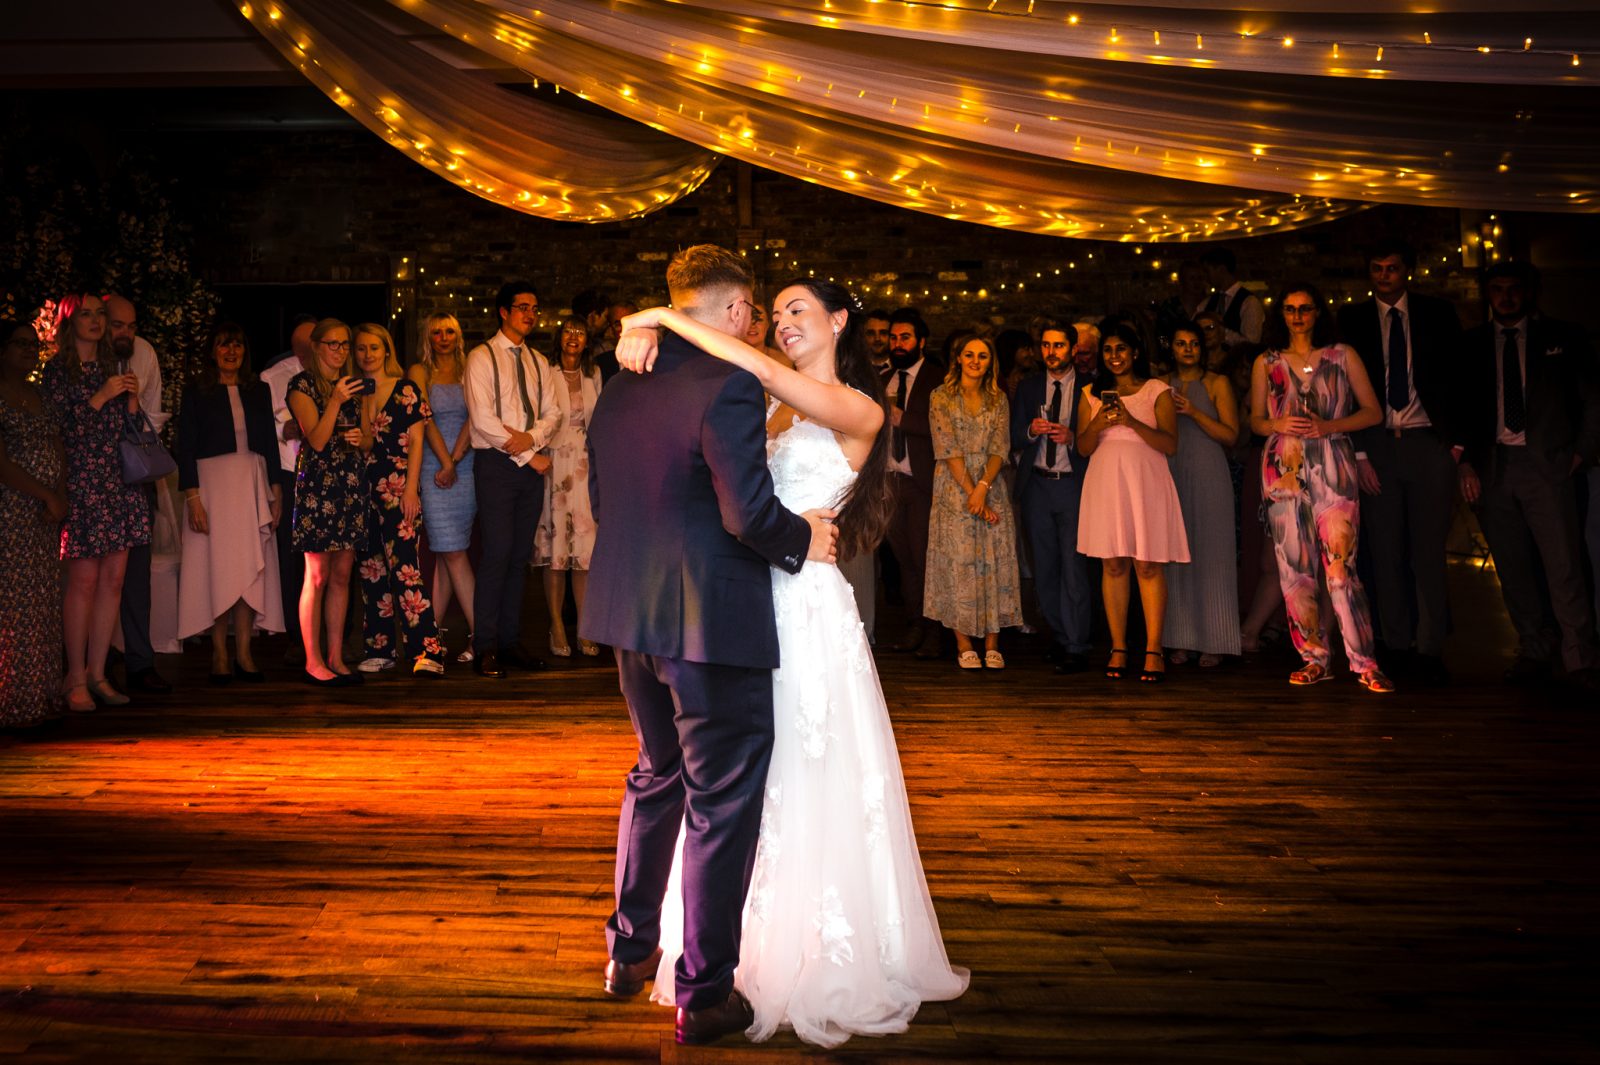 First dance for bride and groom at The Powder Mills Hotel, Battle, Sussex